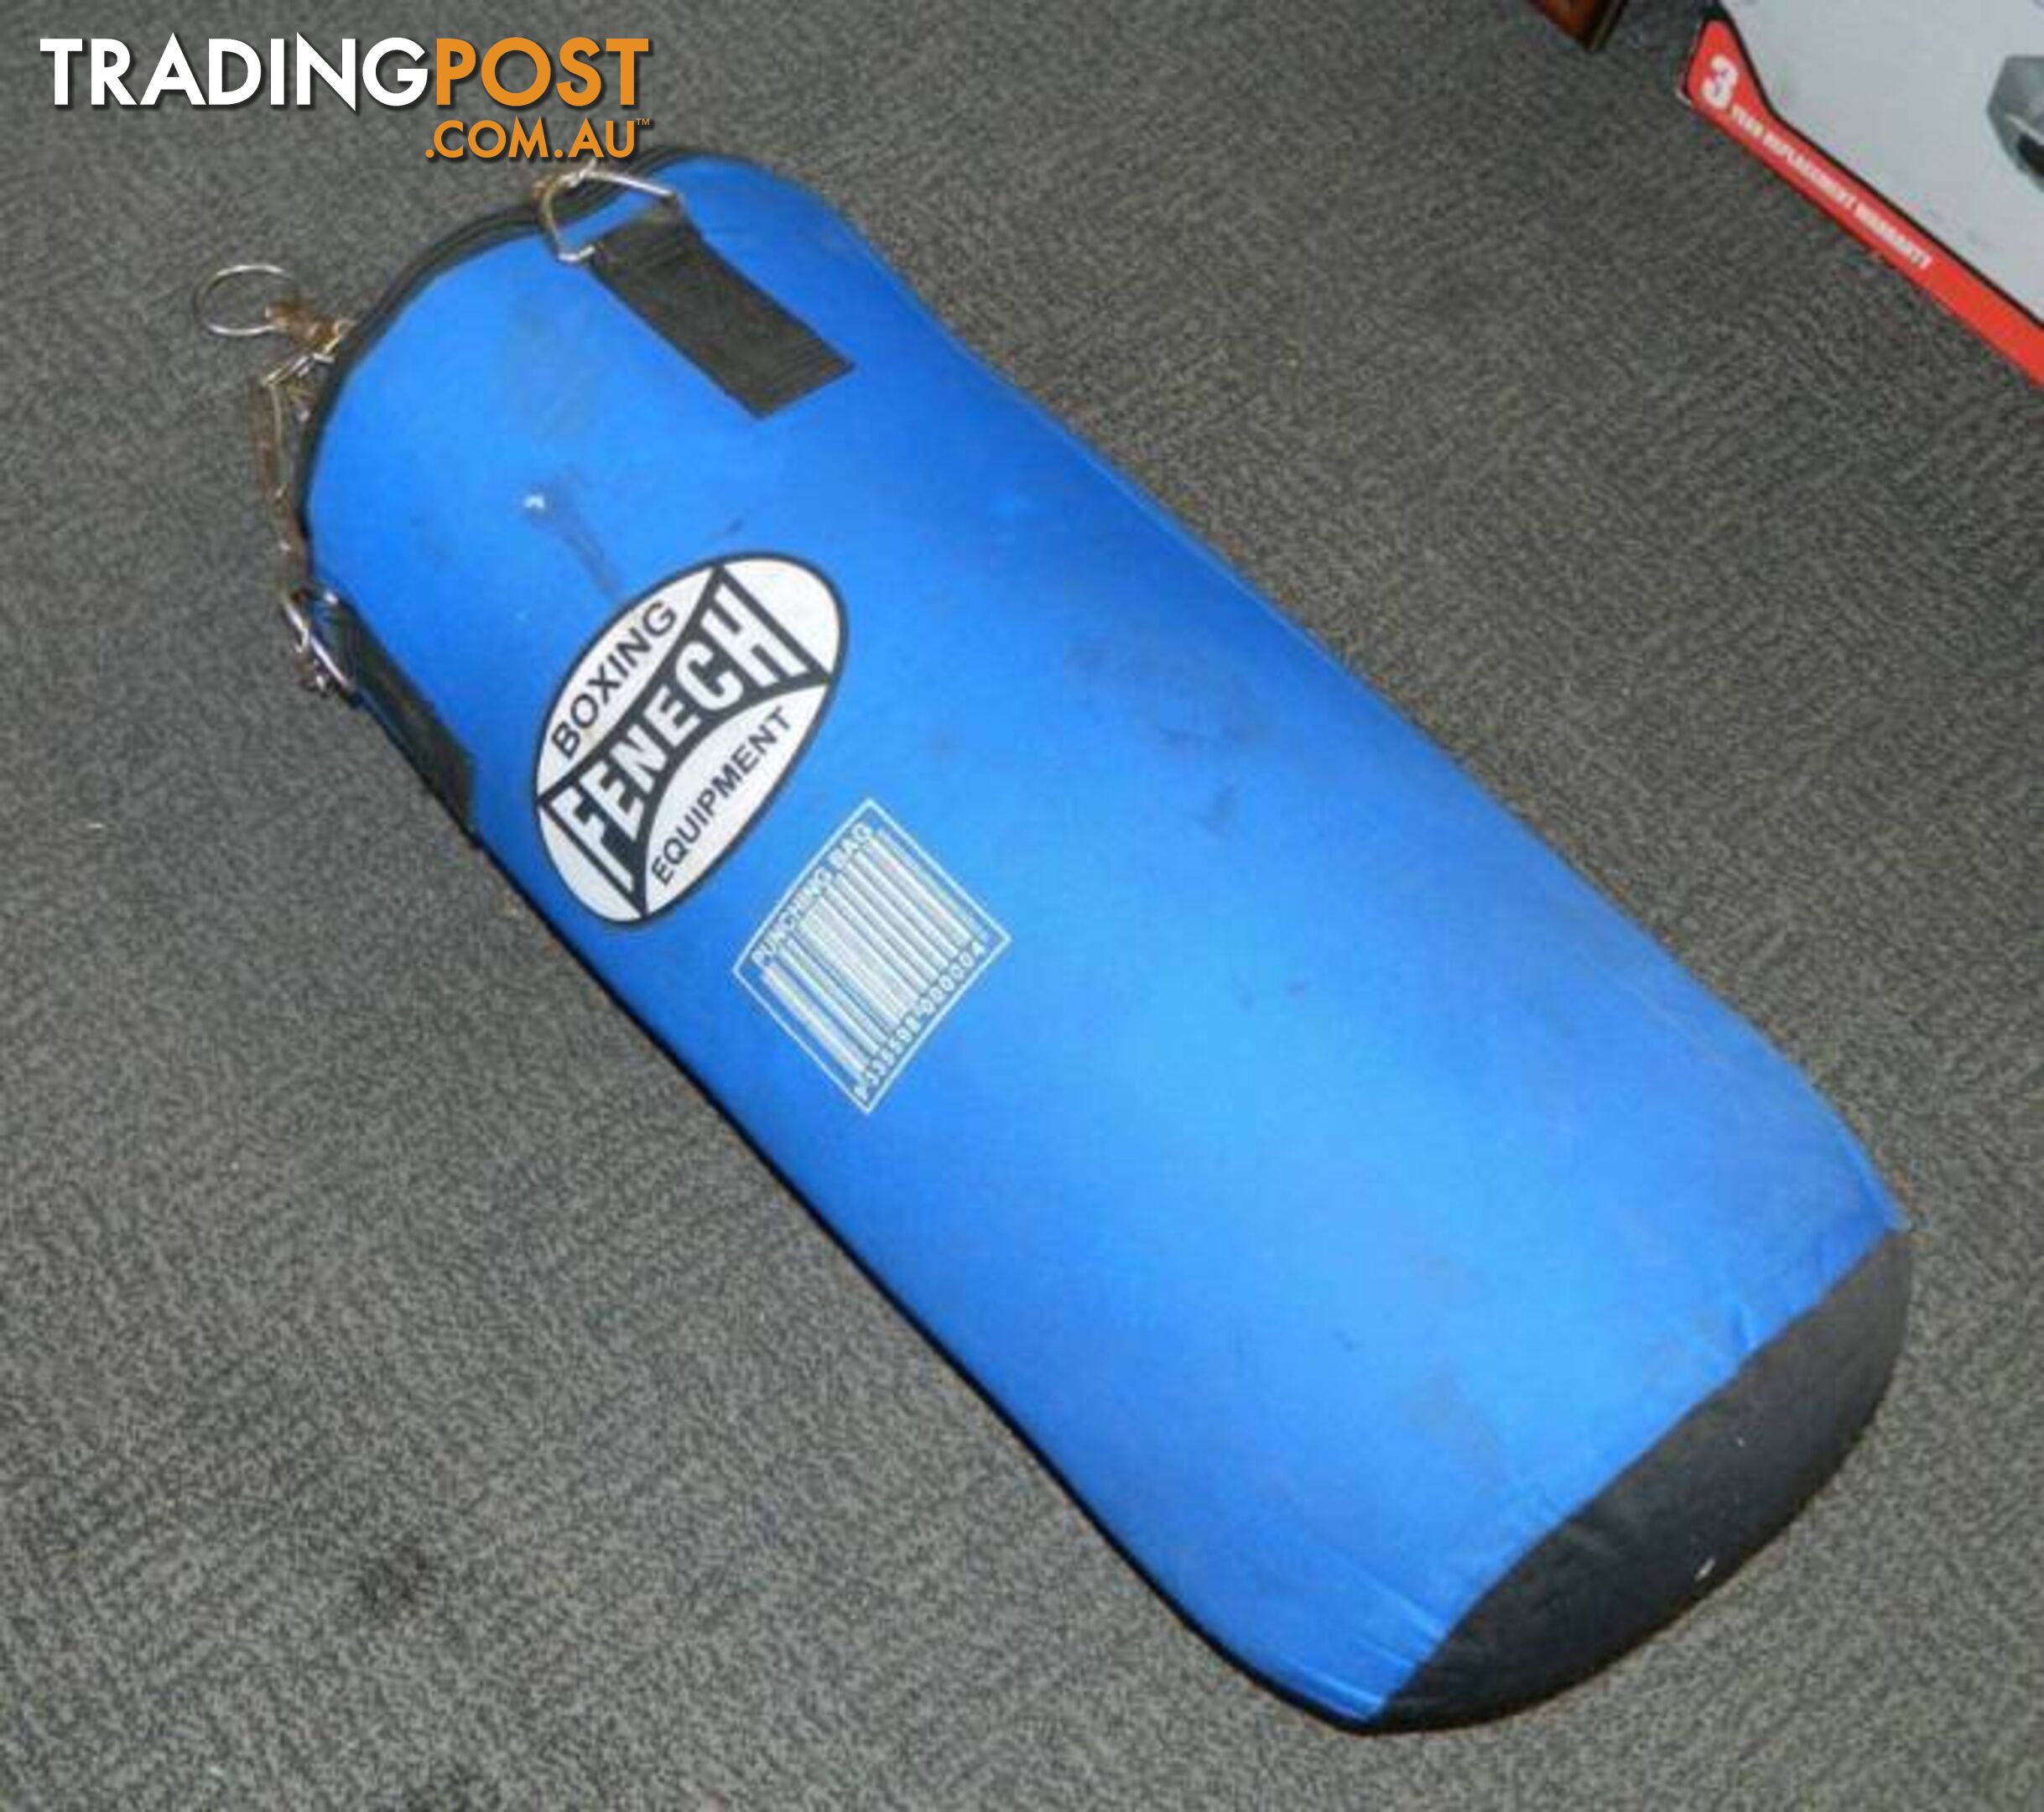 70 cm Fenech Blue Boxing bag with hanging hooks !!!